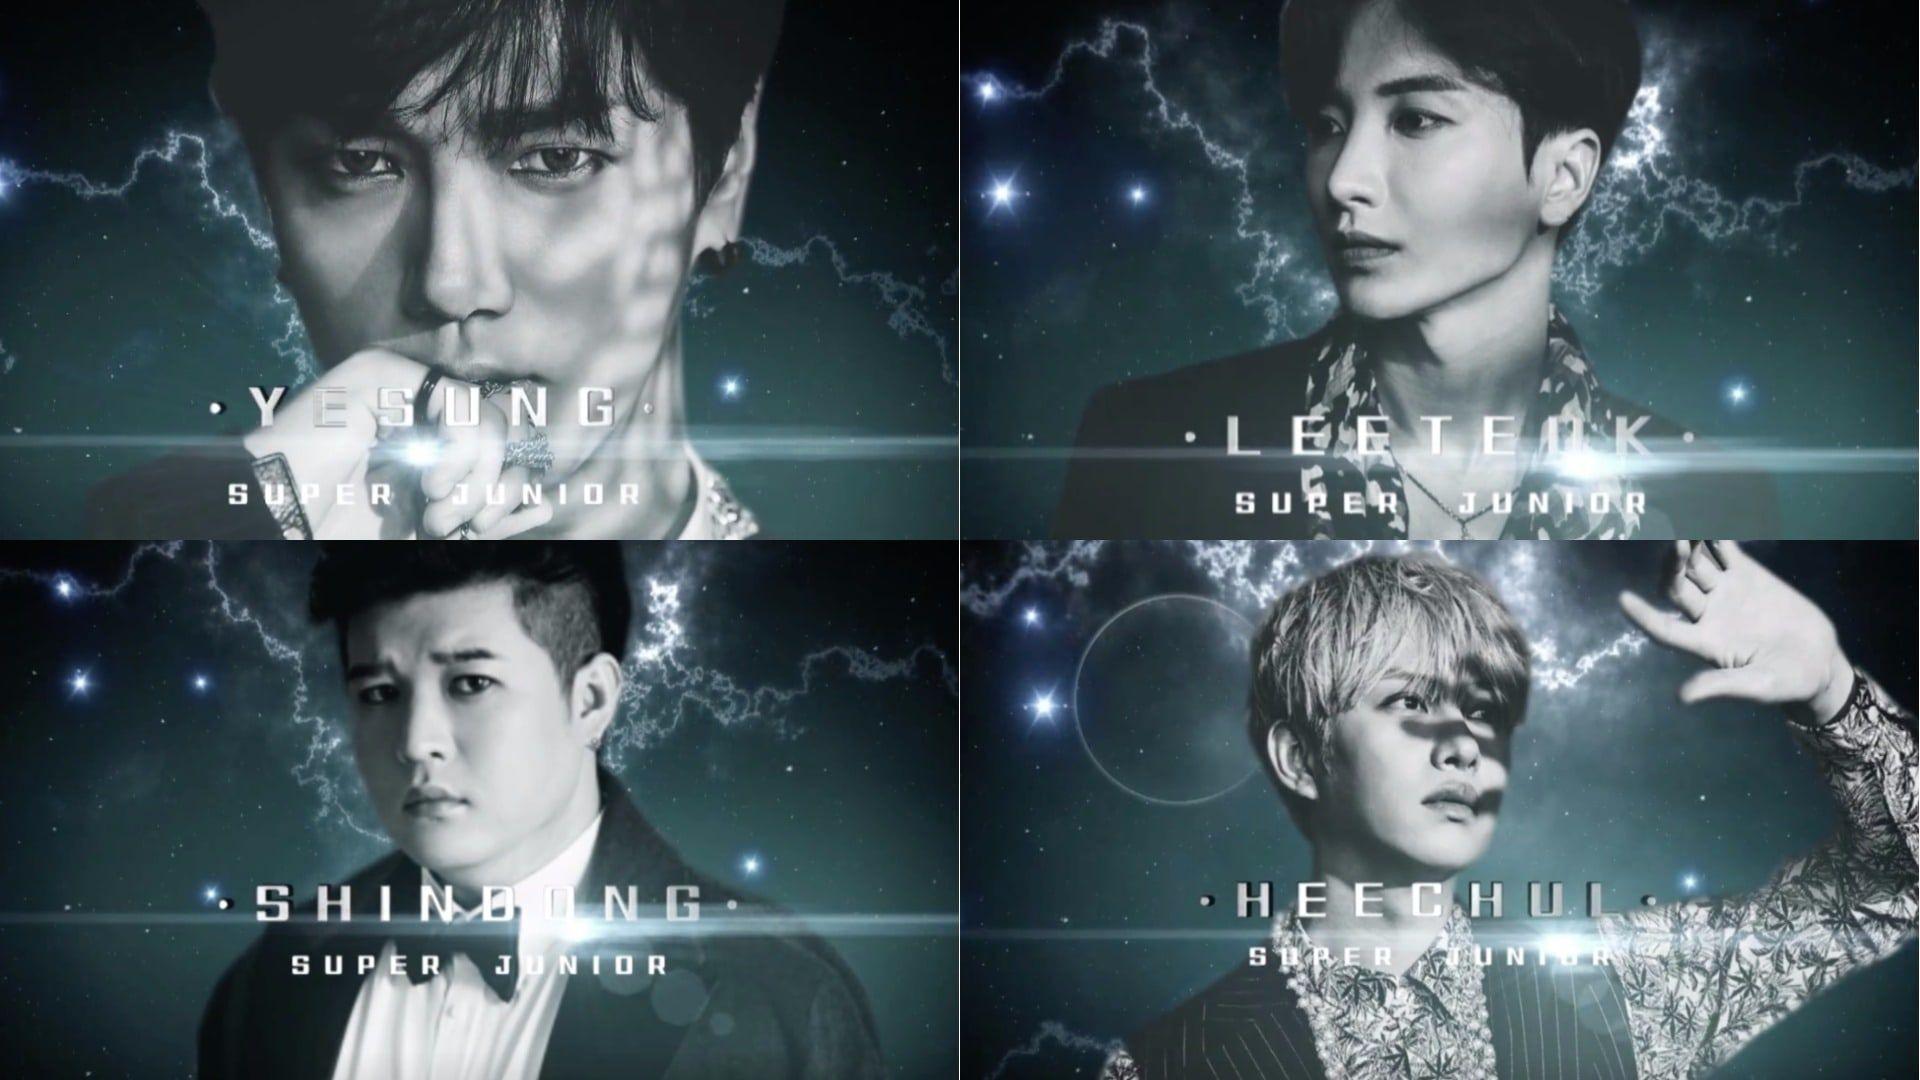 Watch: Super Junior Drops Teasers For Yesung, Leeteuk, Shindong